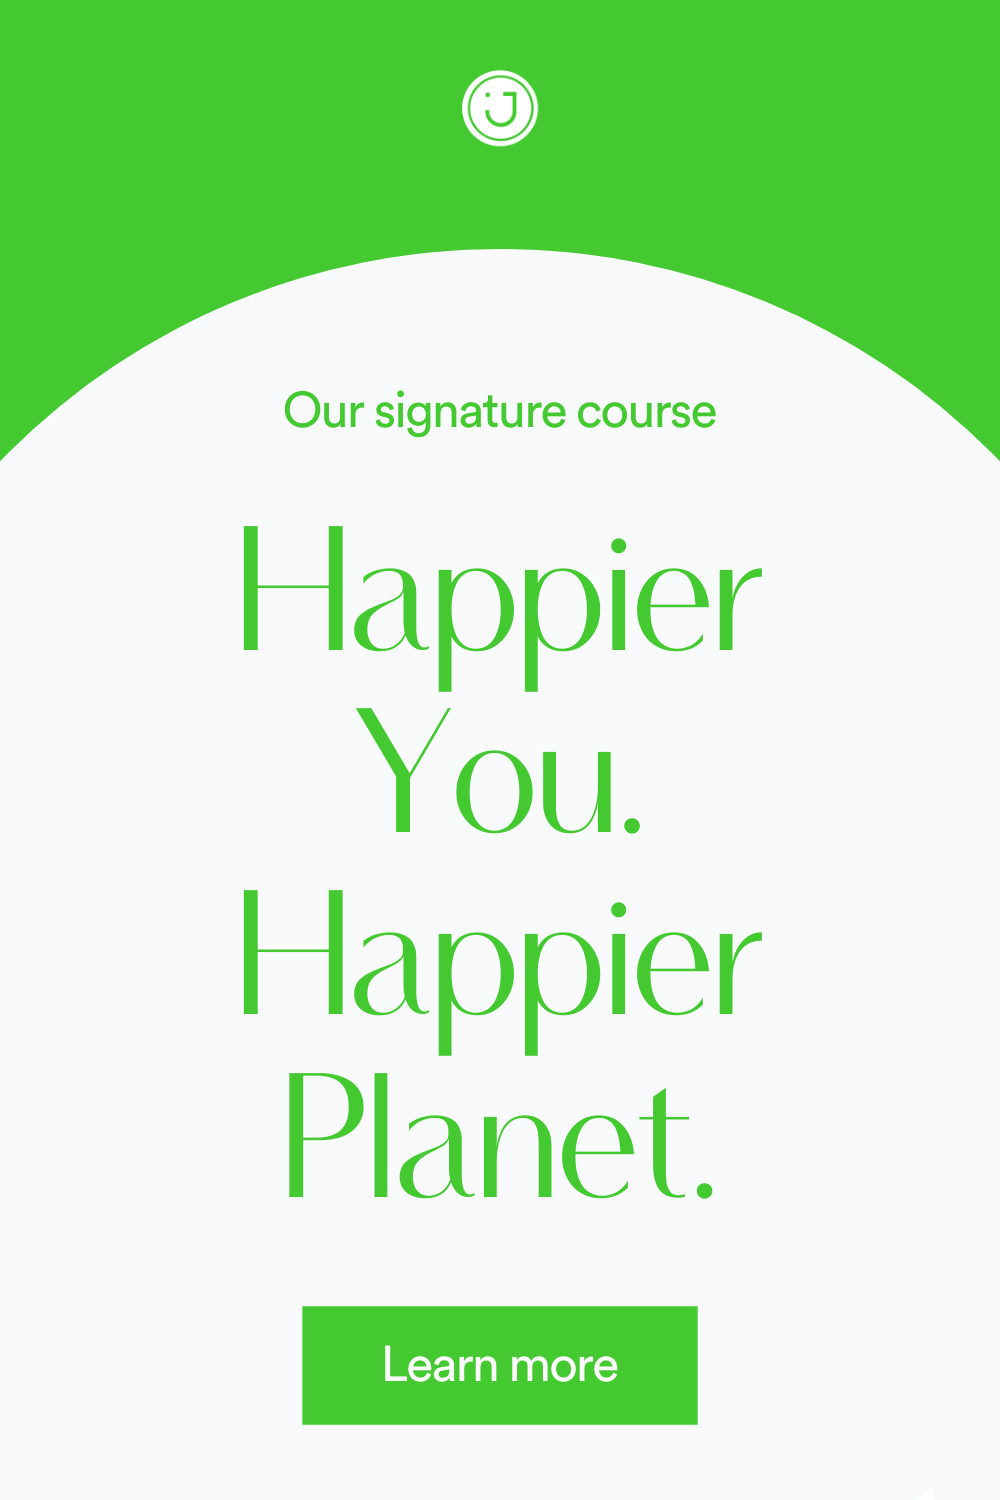 Our signature course